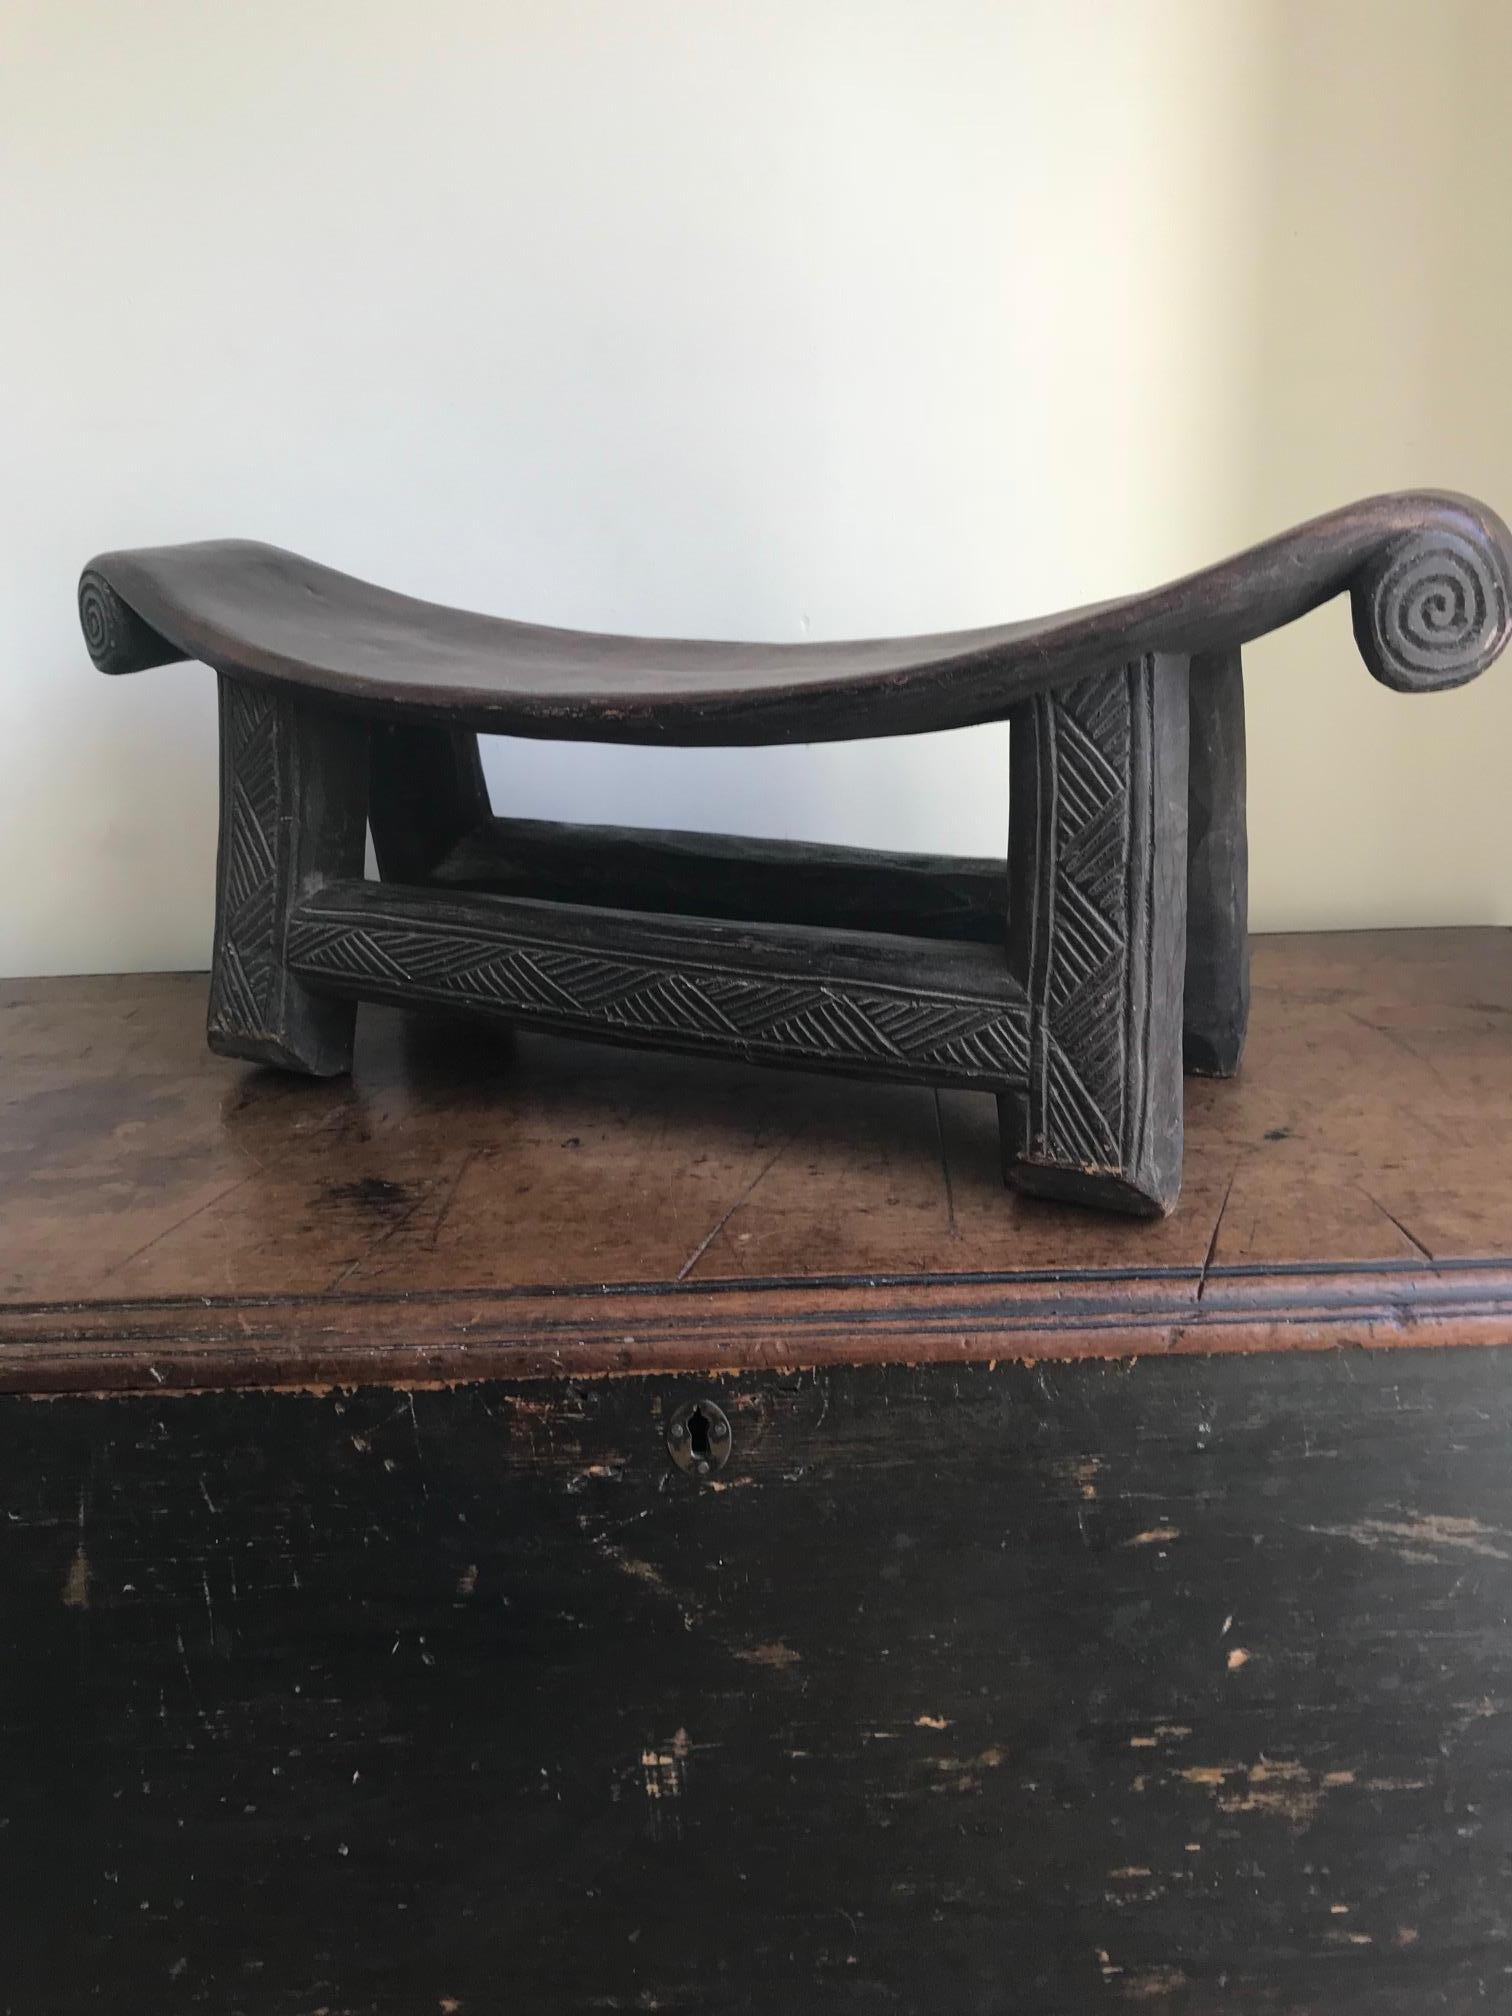 An elegant wooden tribal stool most probably originating from the Shona Tribe Zimbabwe, due to its linear carvings and scrolled circular details.